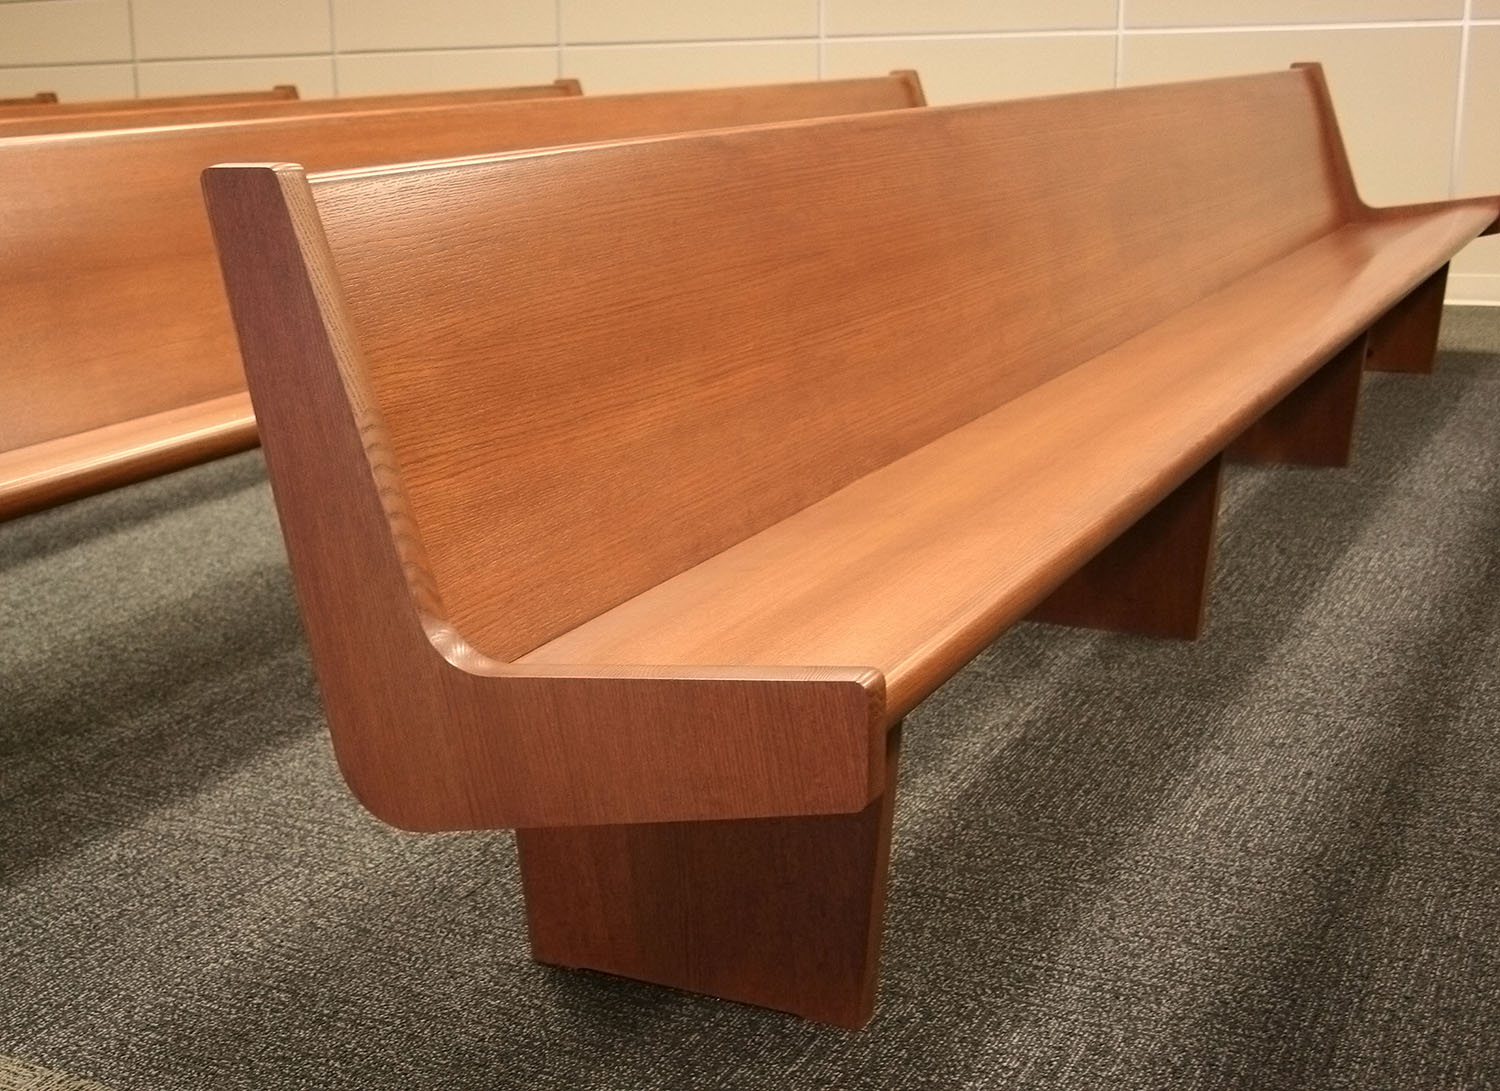 All Wood Benches inside Lancaster Municipal Courts - Lancaster, TX